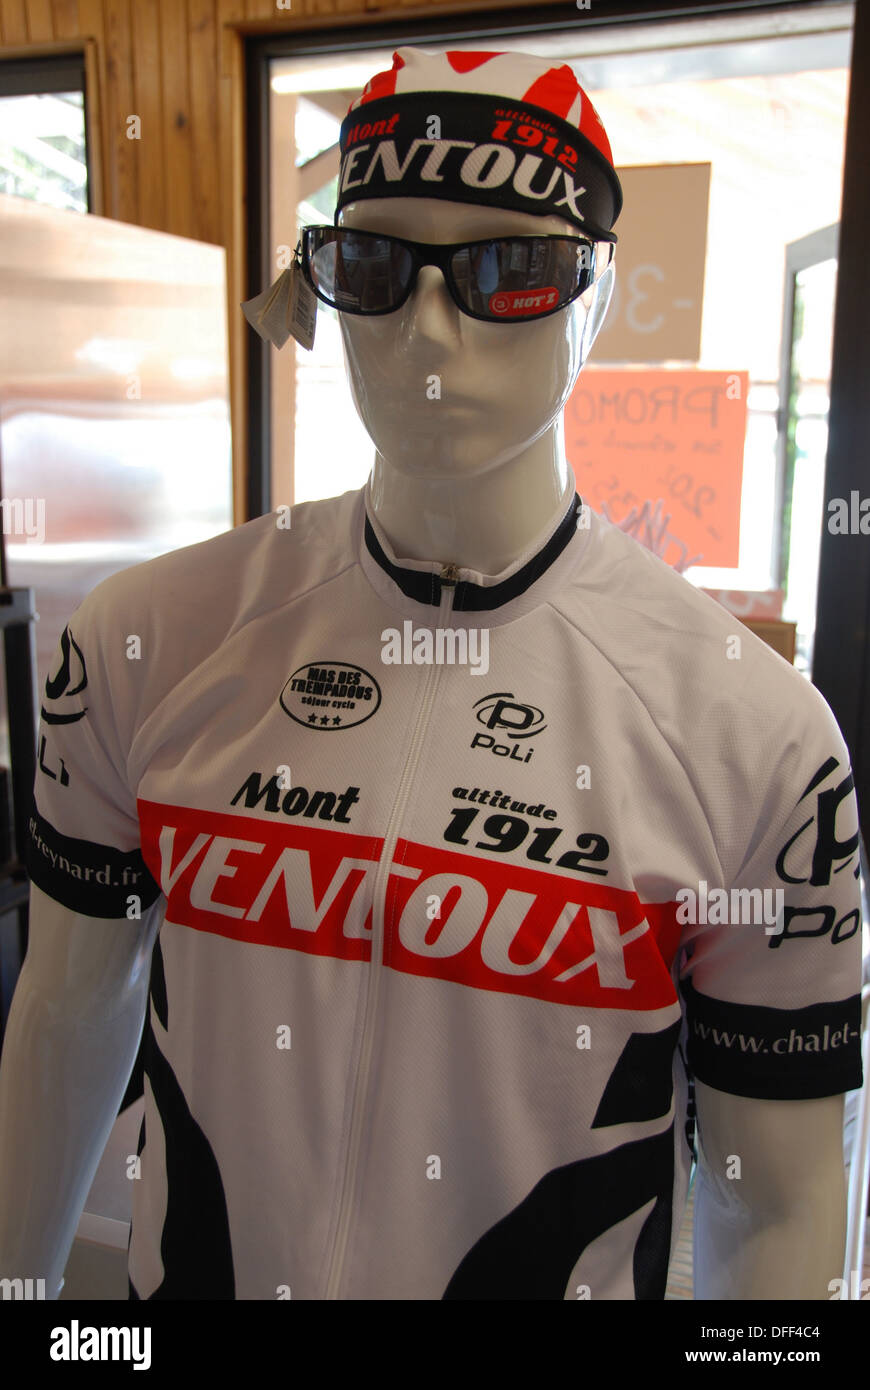 2012, a cycling jersey, sunglasses and hat on a dummy in a shop near the Mont Ventoux, Provence, France, branded with Mont VENTOUX and 1912, which is its metres in height.  Mont Ventoux is famous as a mountain stage of the Tour de France cycle race and visited by thousands every year as the mountain and surrounding area is a mecca for amateur cyclists to ride on. Stock Photo